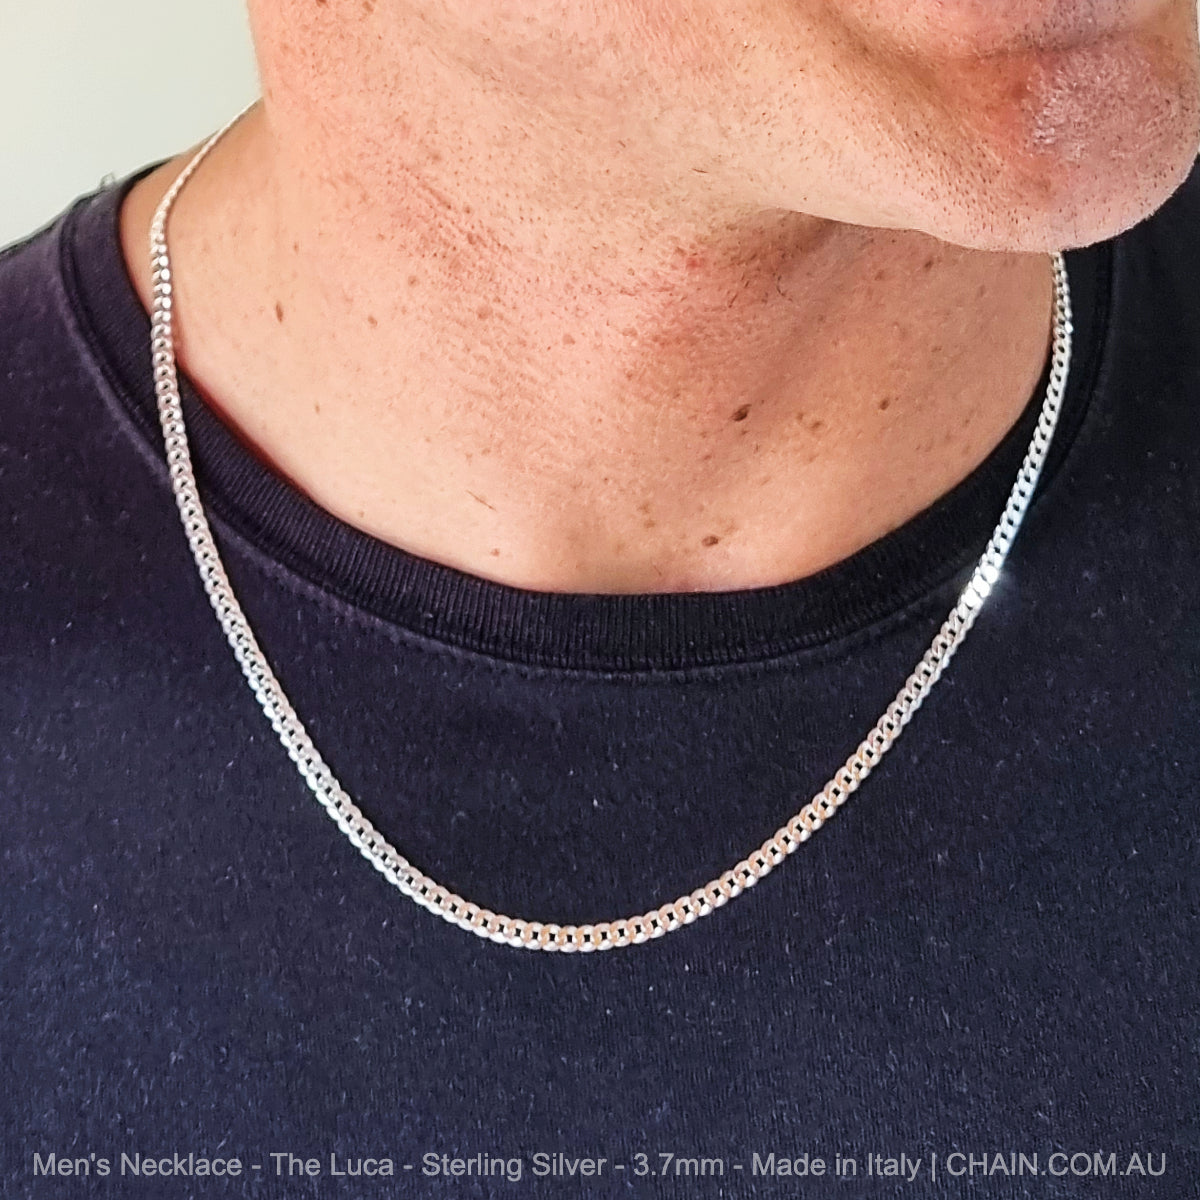 Men's Chain Necklace - The Luca - Sterling Silver - 3.7mm - Made in Italy. Australia wide shipping. Shop jewellery chain chain.com.au